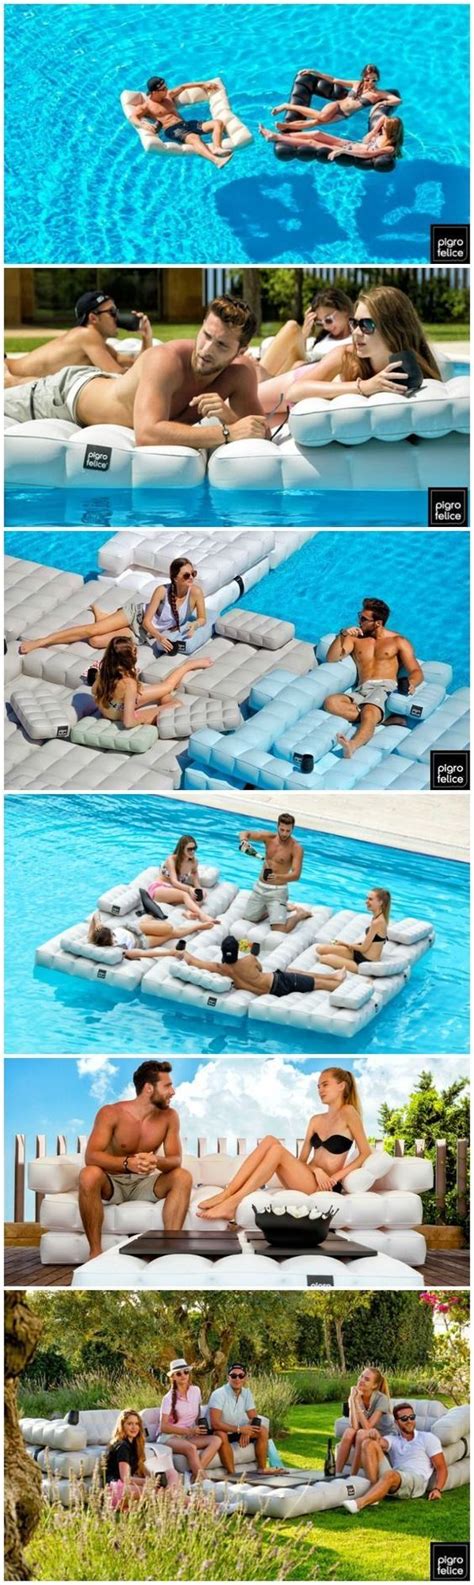 Kelsyus water floats and coolers. Very cool modular water floats. Dock or poolside furniture ...